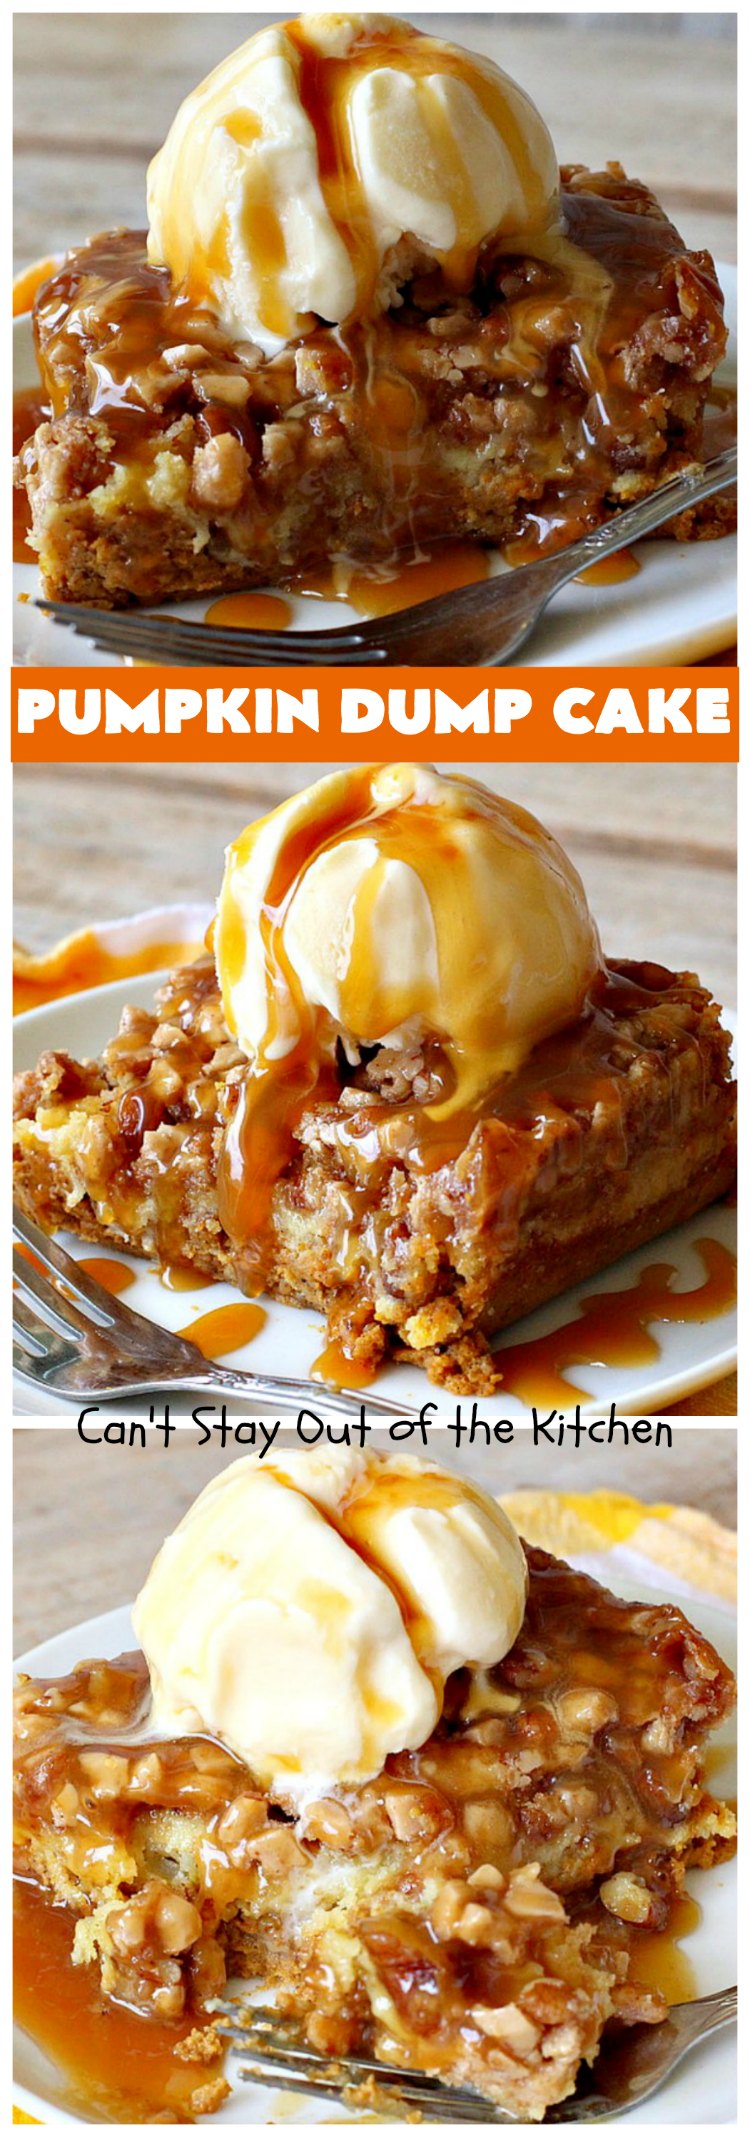 Pumpkin Dump Cake | Can't Stay Out of the Kitchen